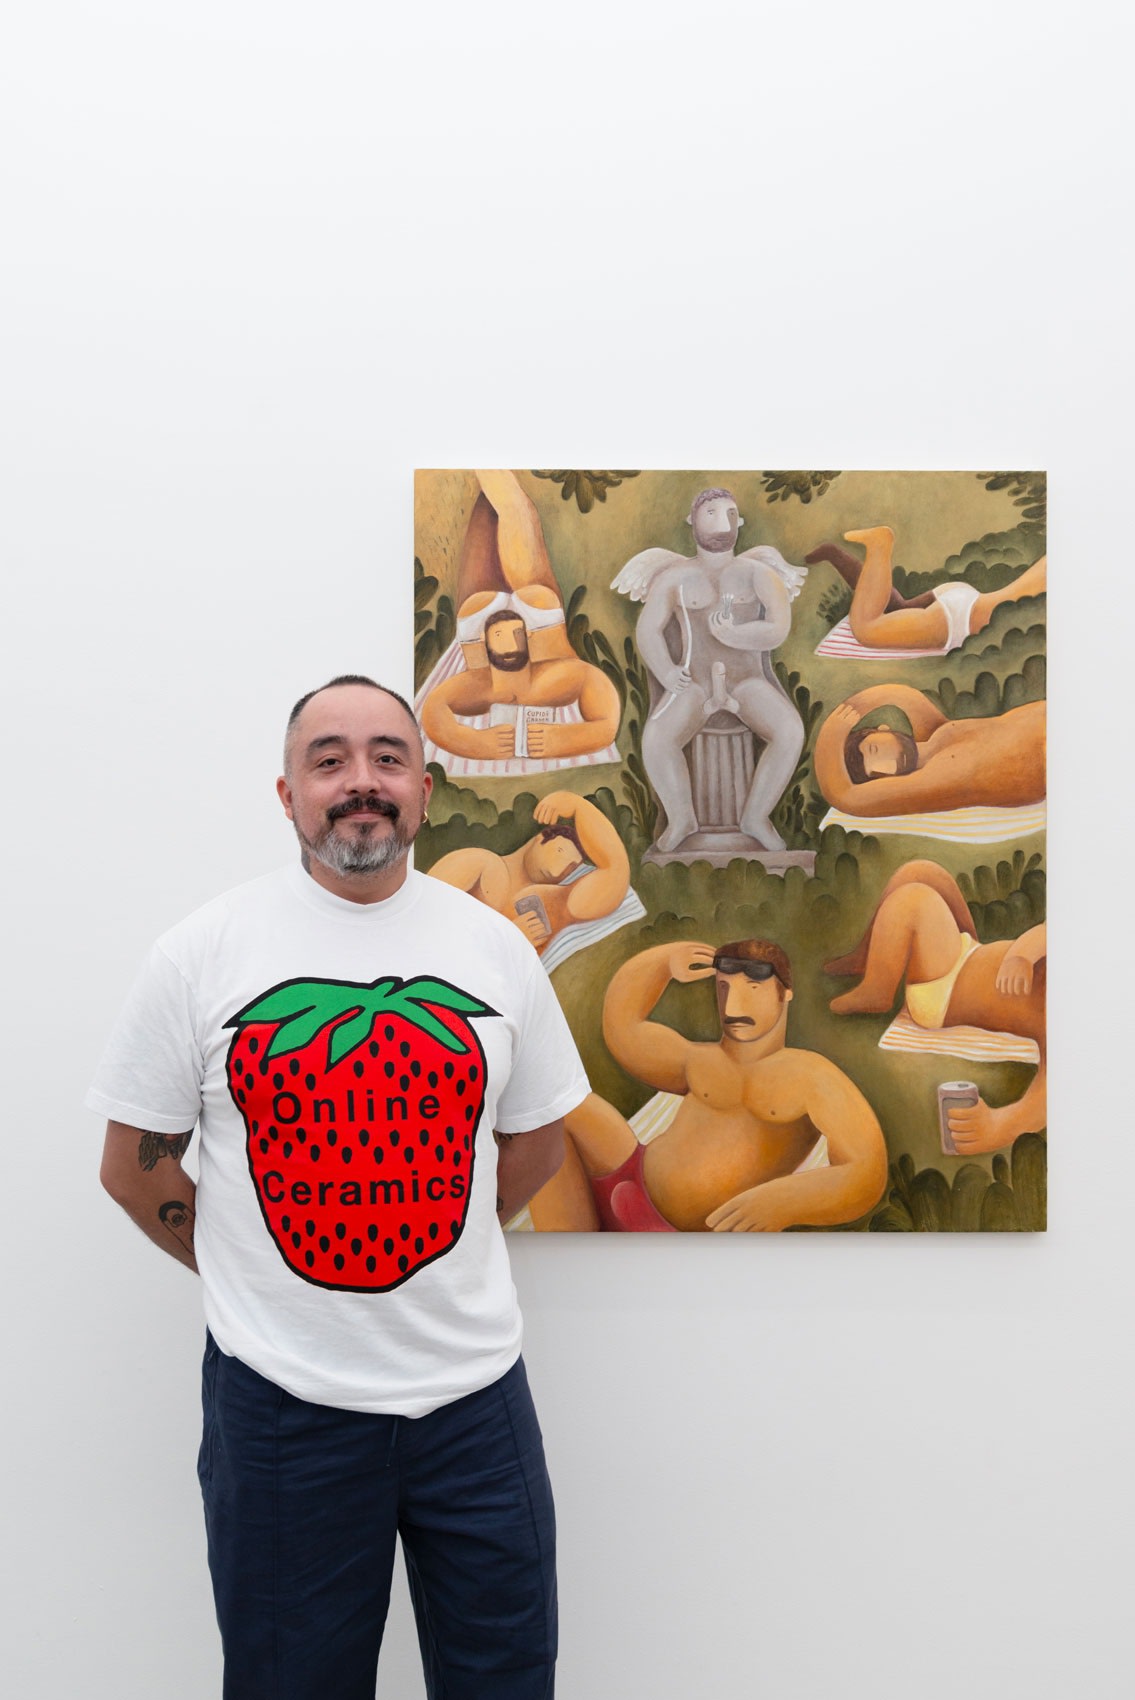 Artist Carlos Rodriguez posing in front of his work